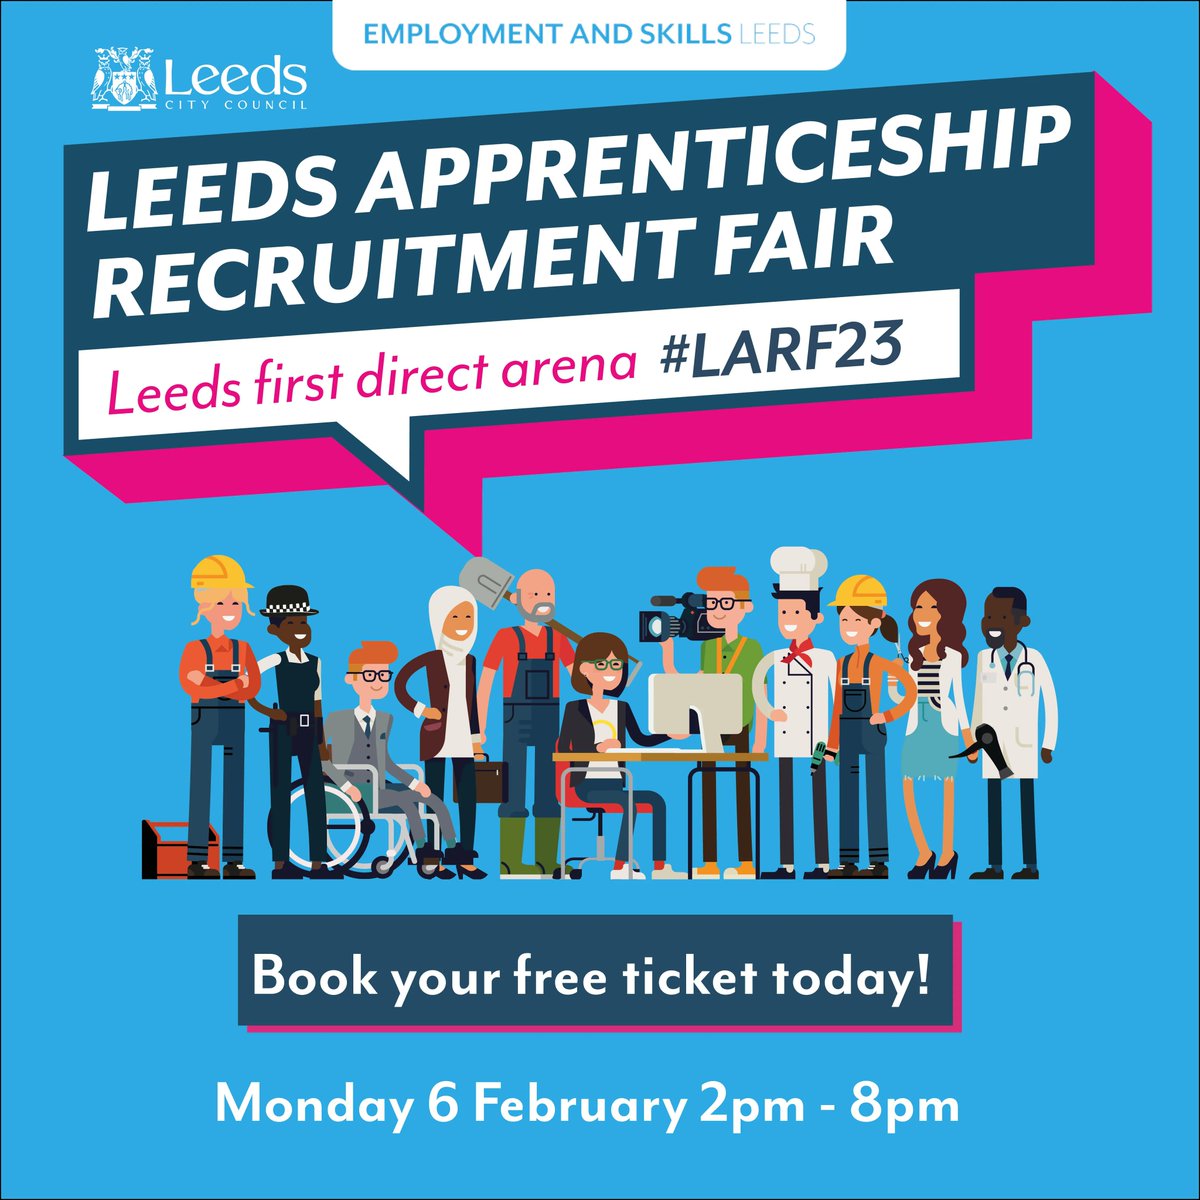 We're really looking forward to attending the Leeds Apprenticeship Recruitment Fair this year, where we'll be showcasing the health and social care #apprenticeships that Leeds has to offer! Book your place here: bit.ly/LARF2023 #LARF23 #NAW23 @eandsleeds @LeedsCC_News